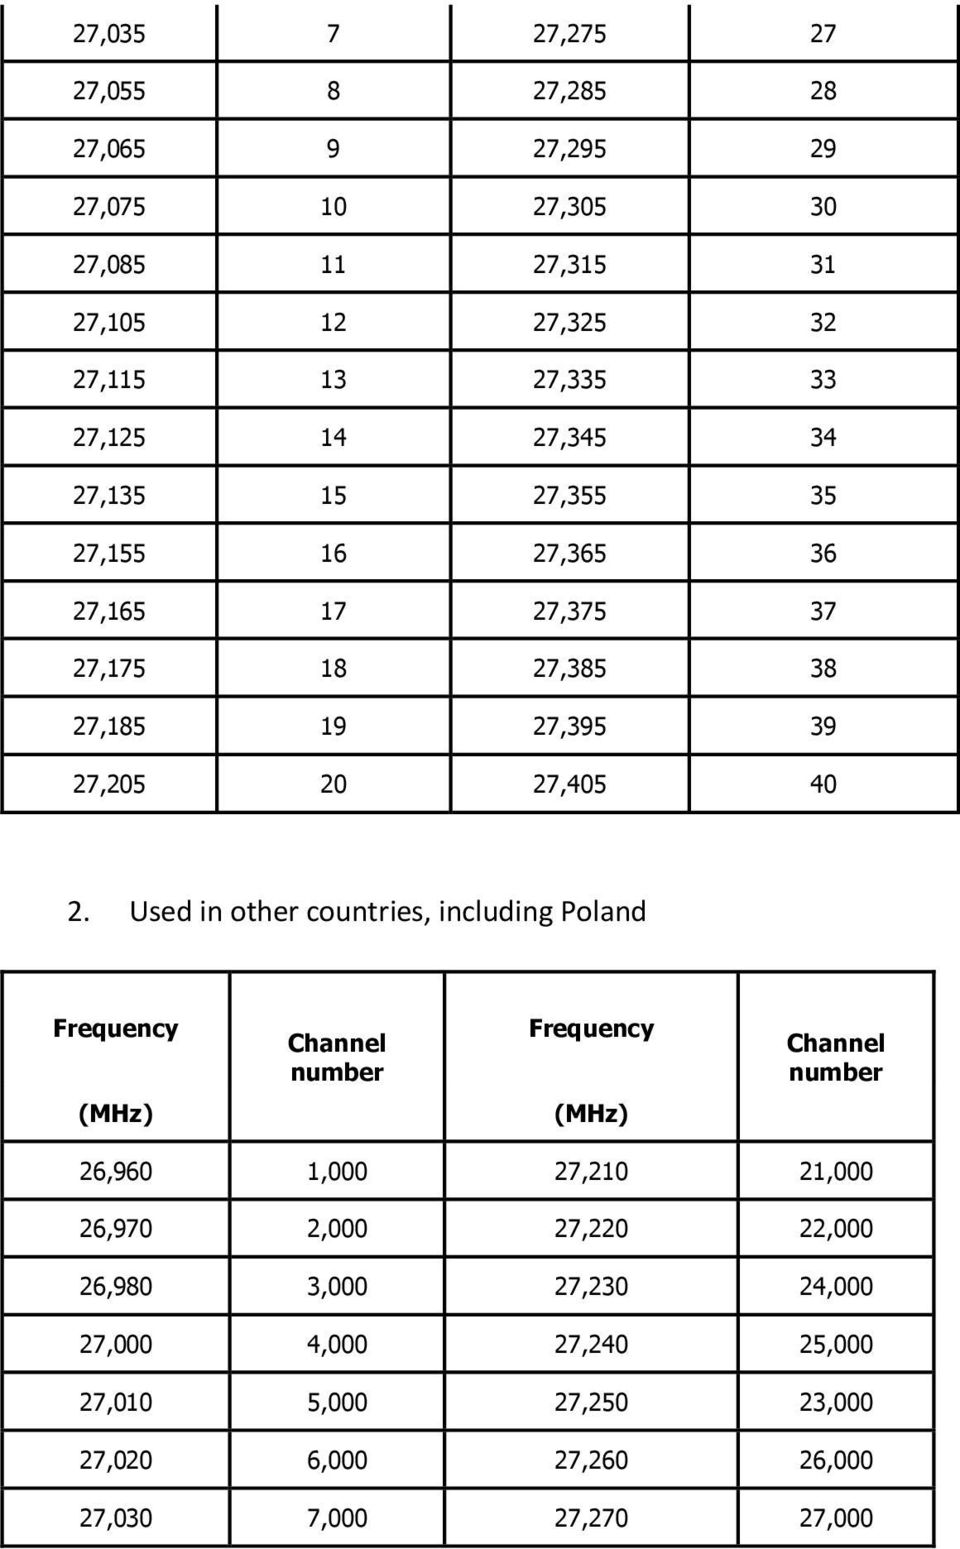 2. Used in other countries, including Poland Frequency Channel number Frequency Channel number 26,960 1,000 27,210 21,000 26,970 2,000